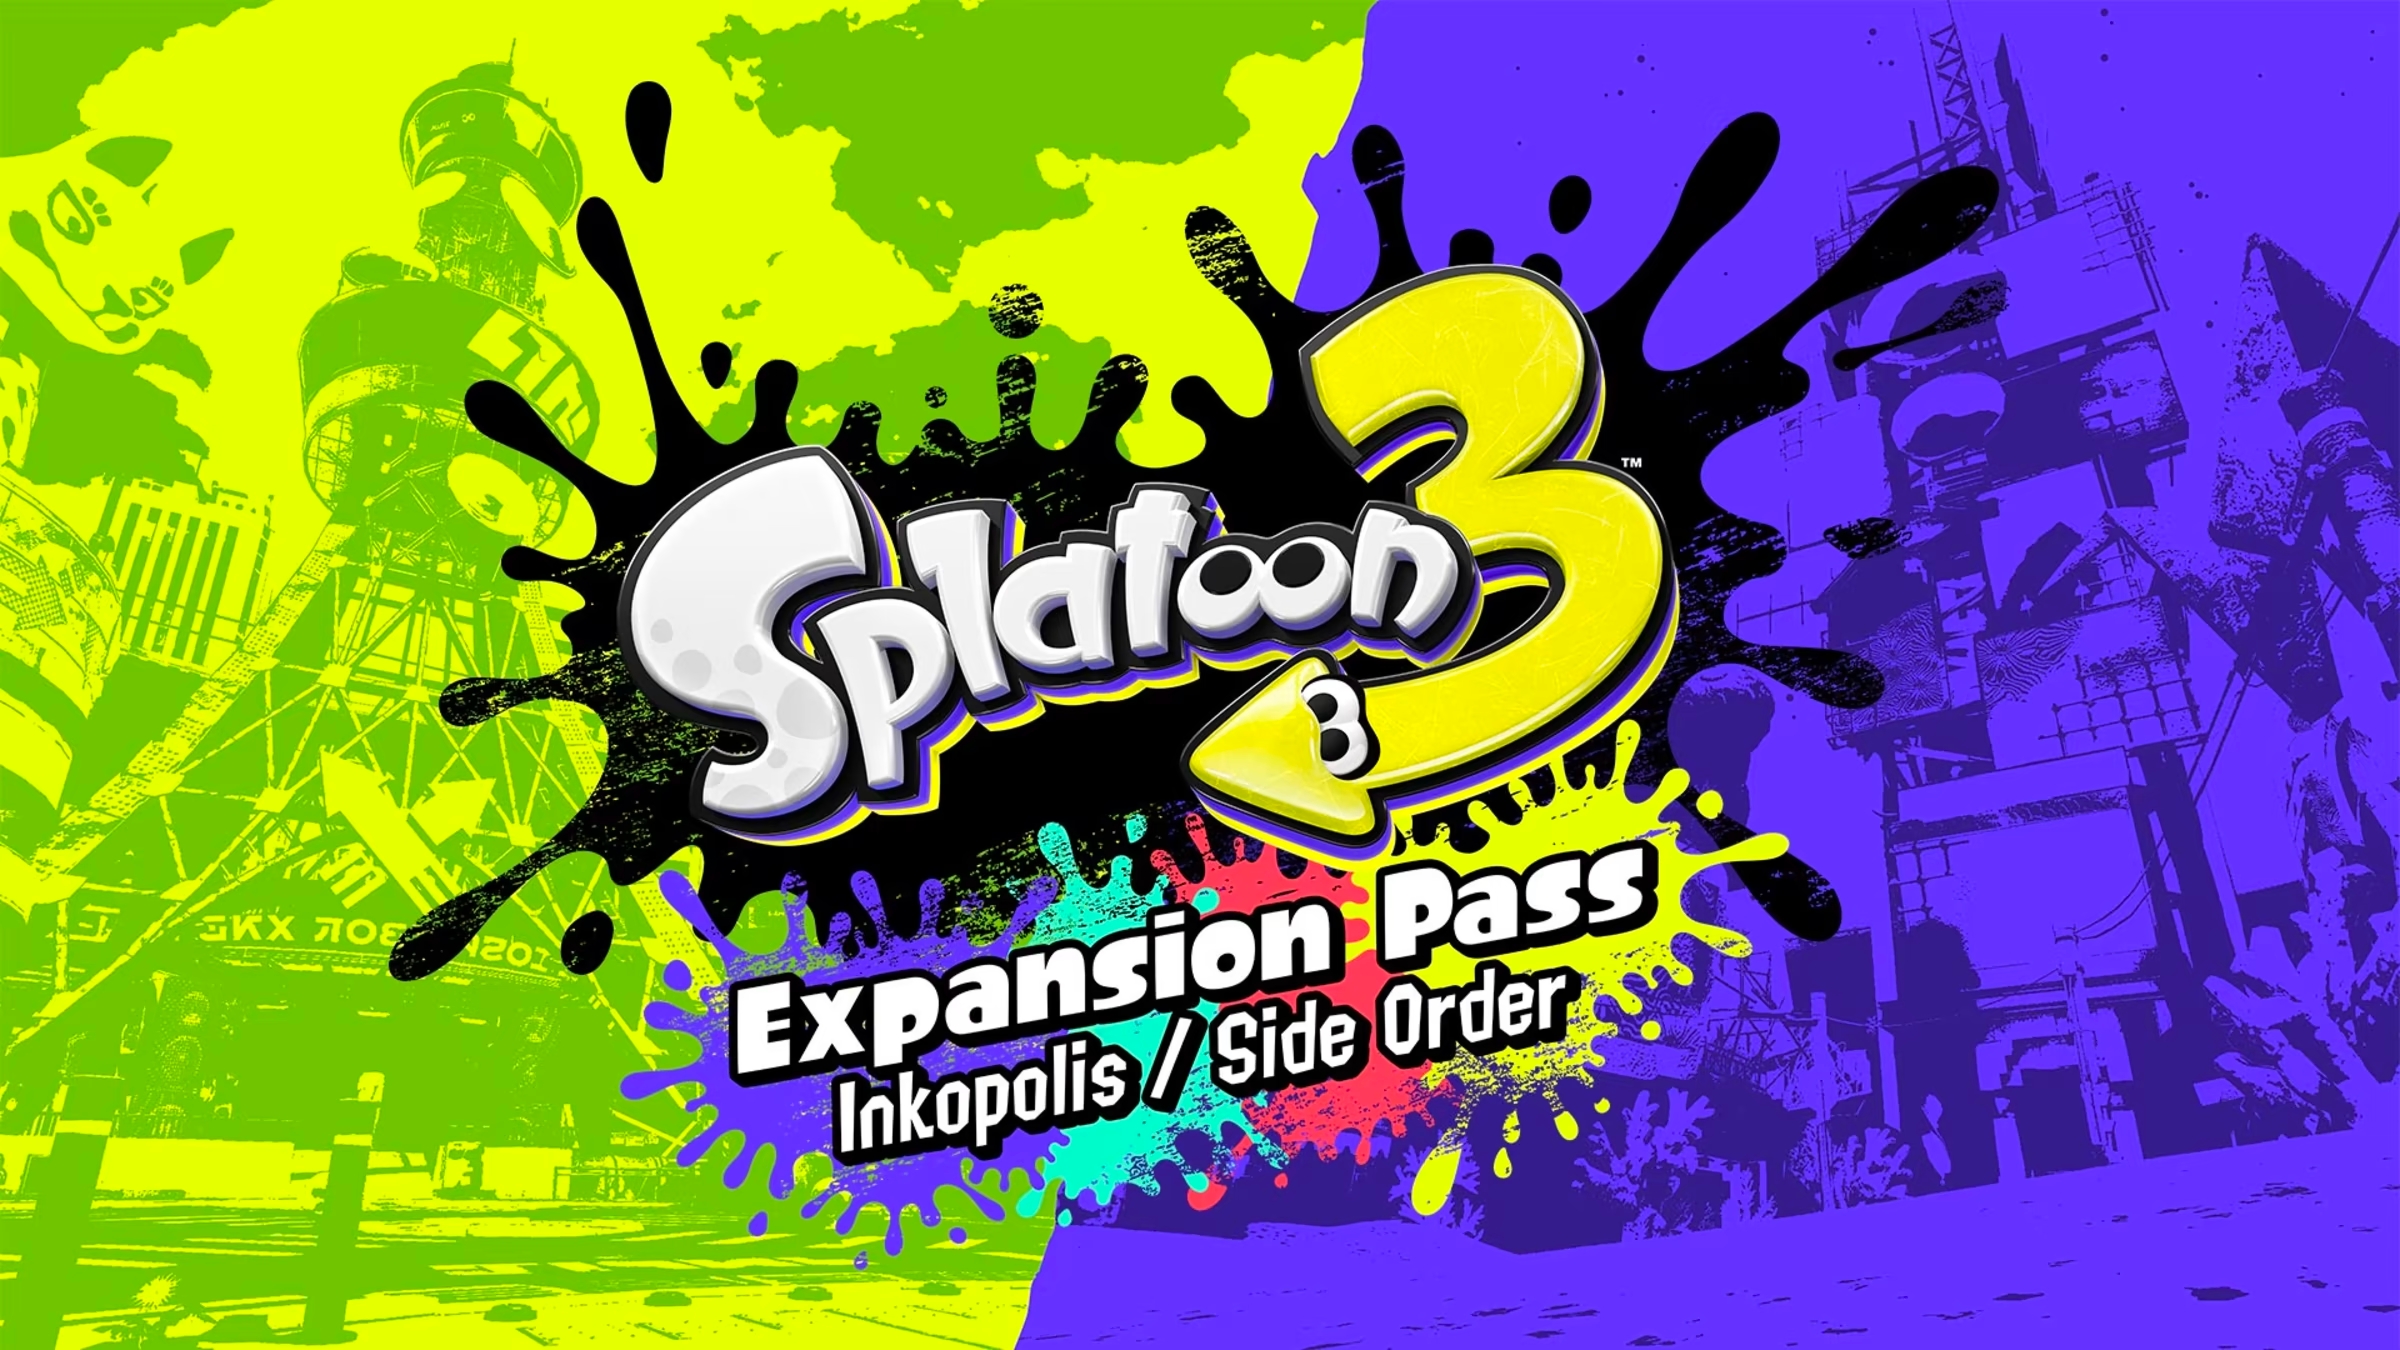 https://gaming-cdn.com/images/products/13600/orig/splatoon-3-expansion-pass-switch-switch-game-nintendo-eshop-europe-cover.jpg?v=1676556044